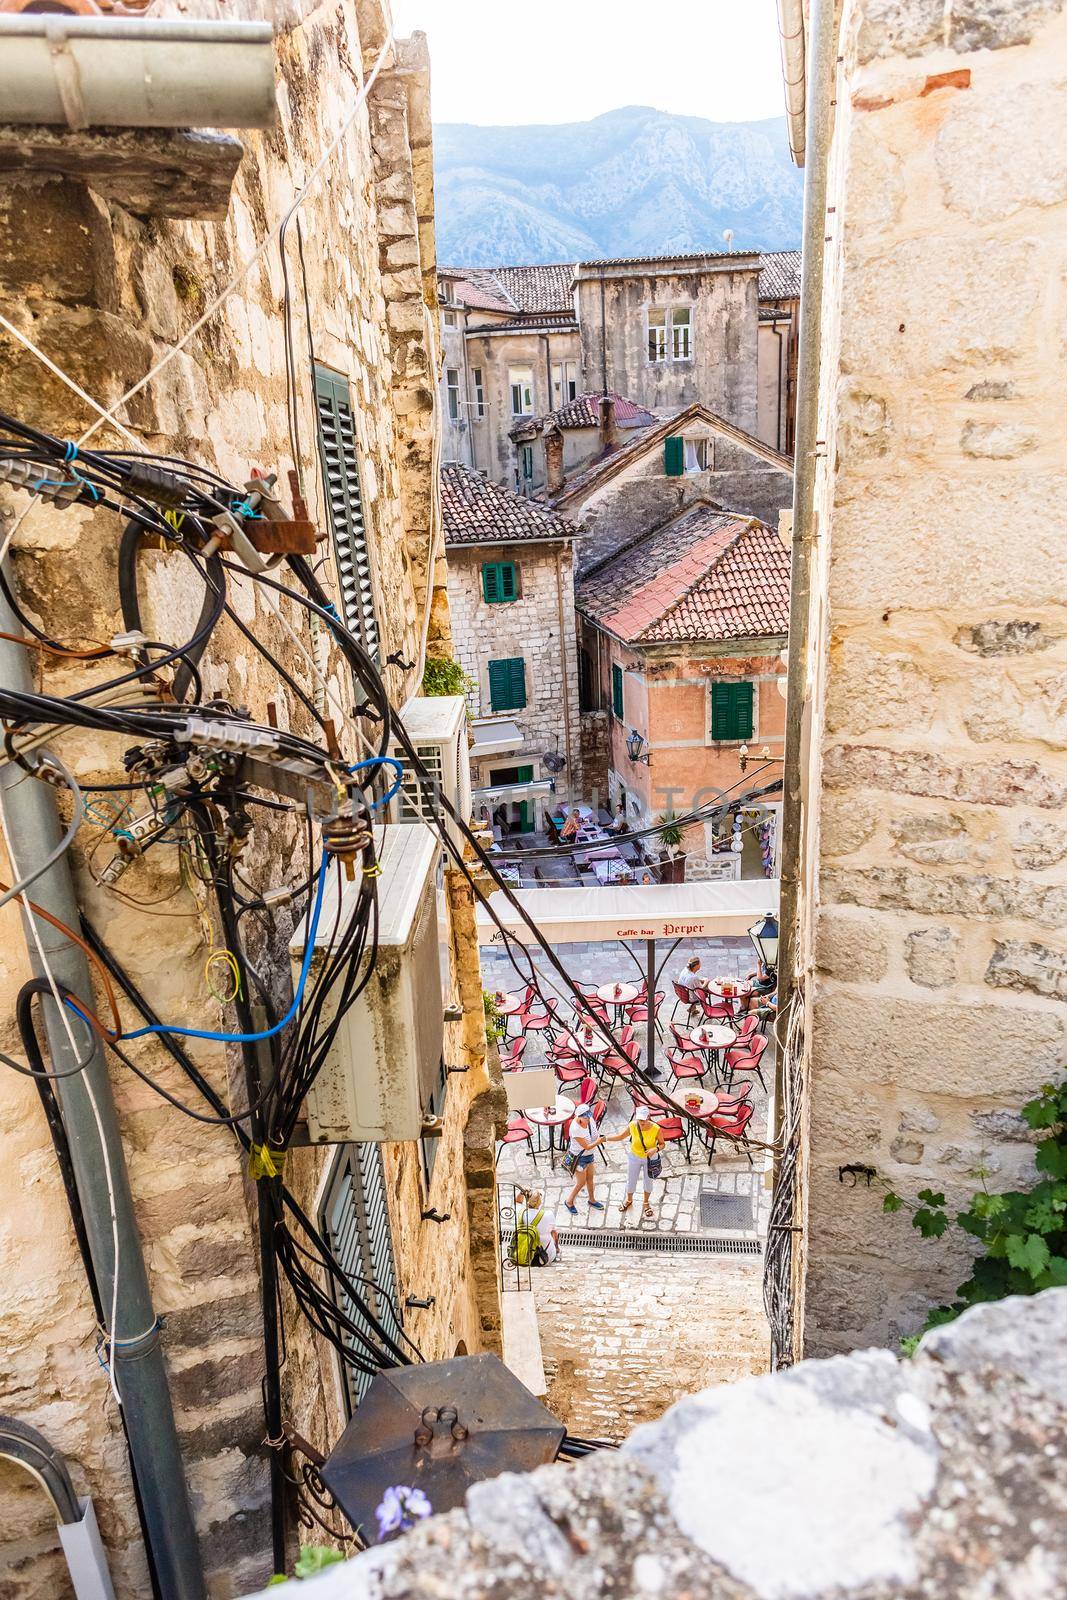 KOTOR, MONTENEGRO - September 16, 2019: Tangled wires and cables between old houses in Kotor city in Montenegro